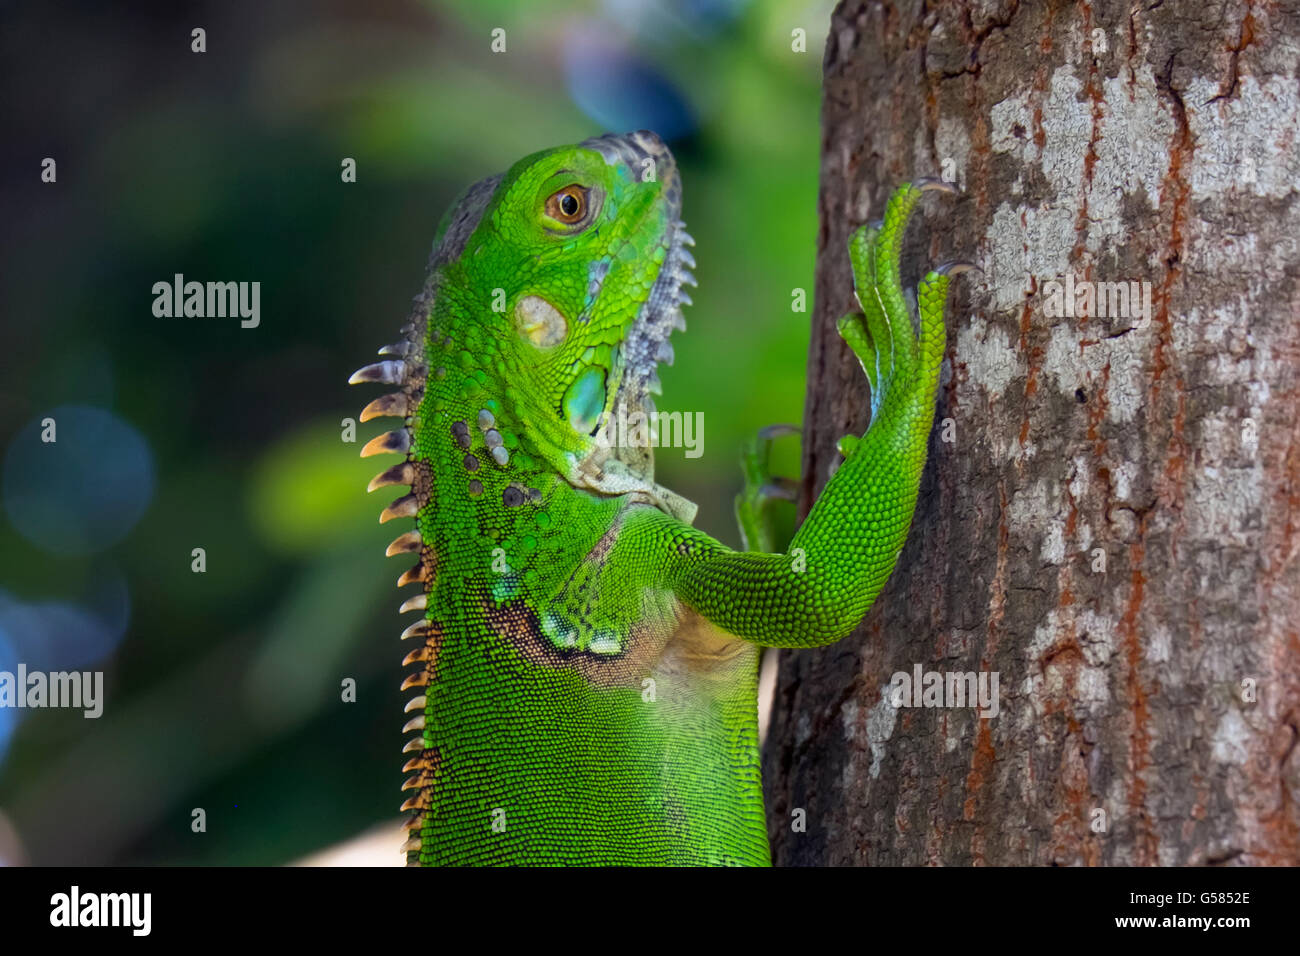 Large bright green lizard with partially shed skin sitting on a tree and looking at the camera Stock Photo